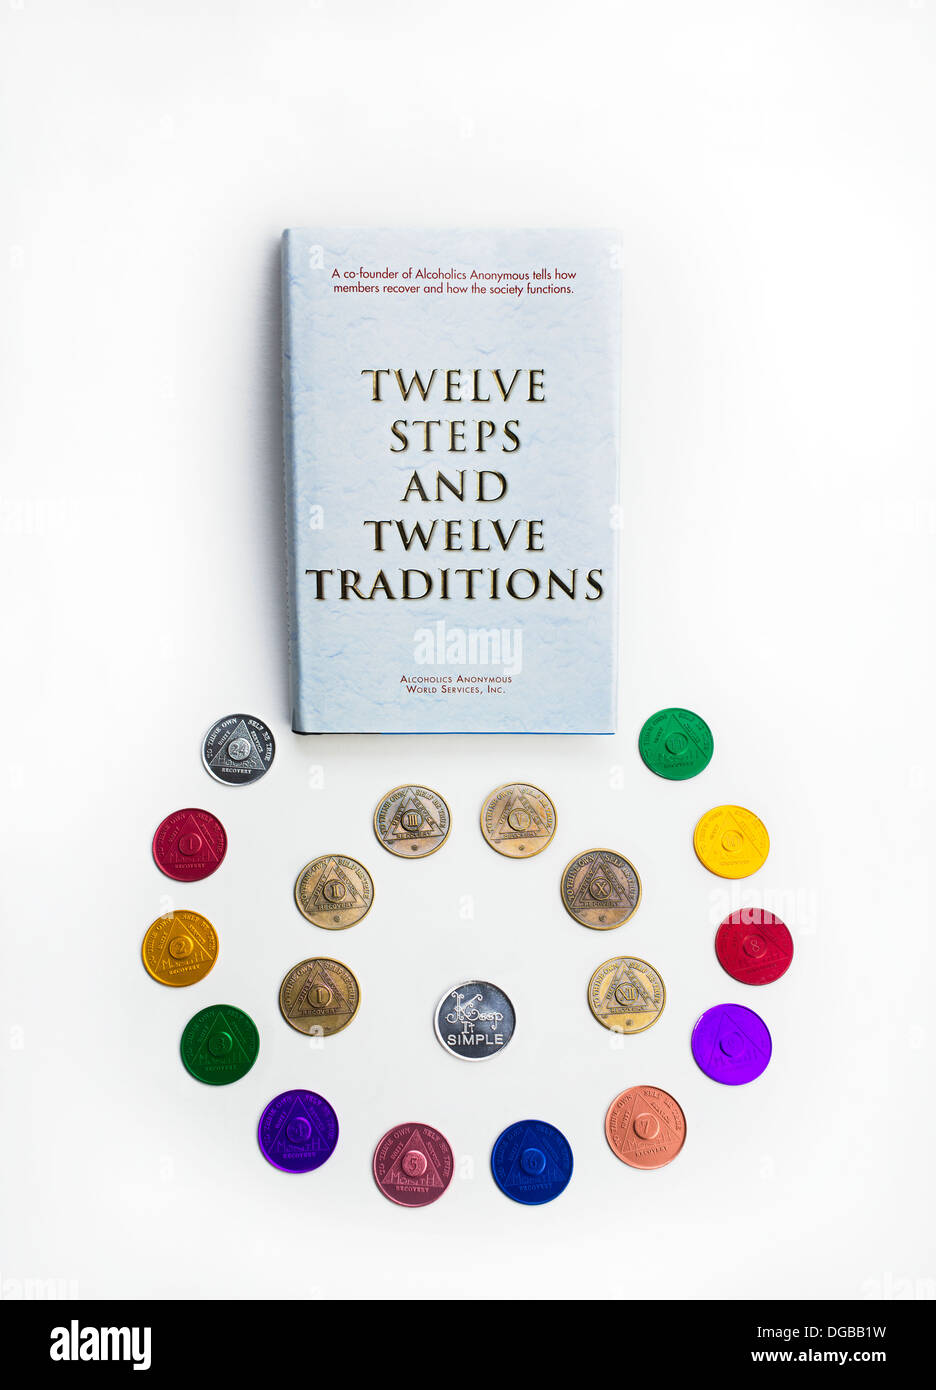 Alcoholics Anonymous AA Book 'The Twelve Steps and Twelve Traditions' with progress coins Stock Photo